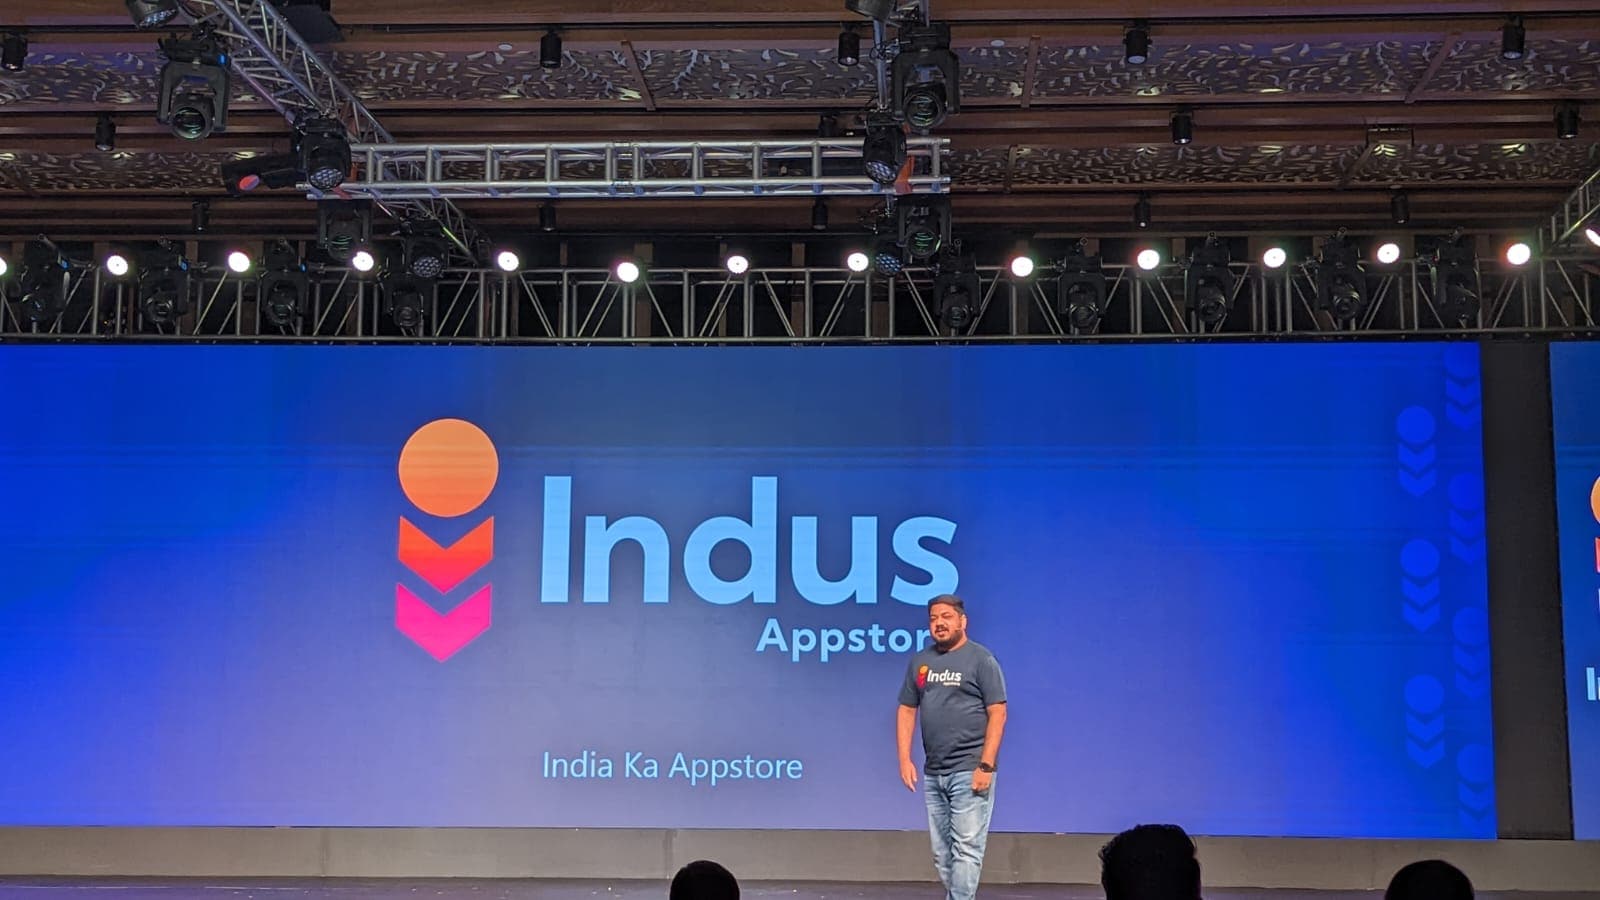 PhonePe's Indus Appstore onboards real-money gaming apps ahead of public launch